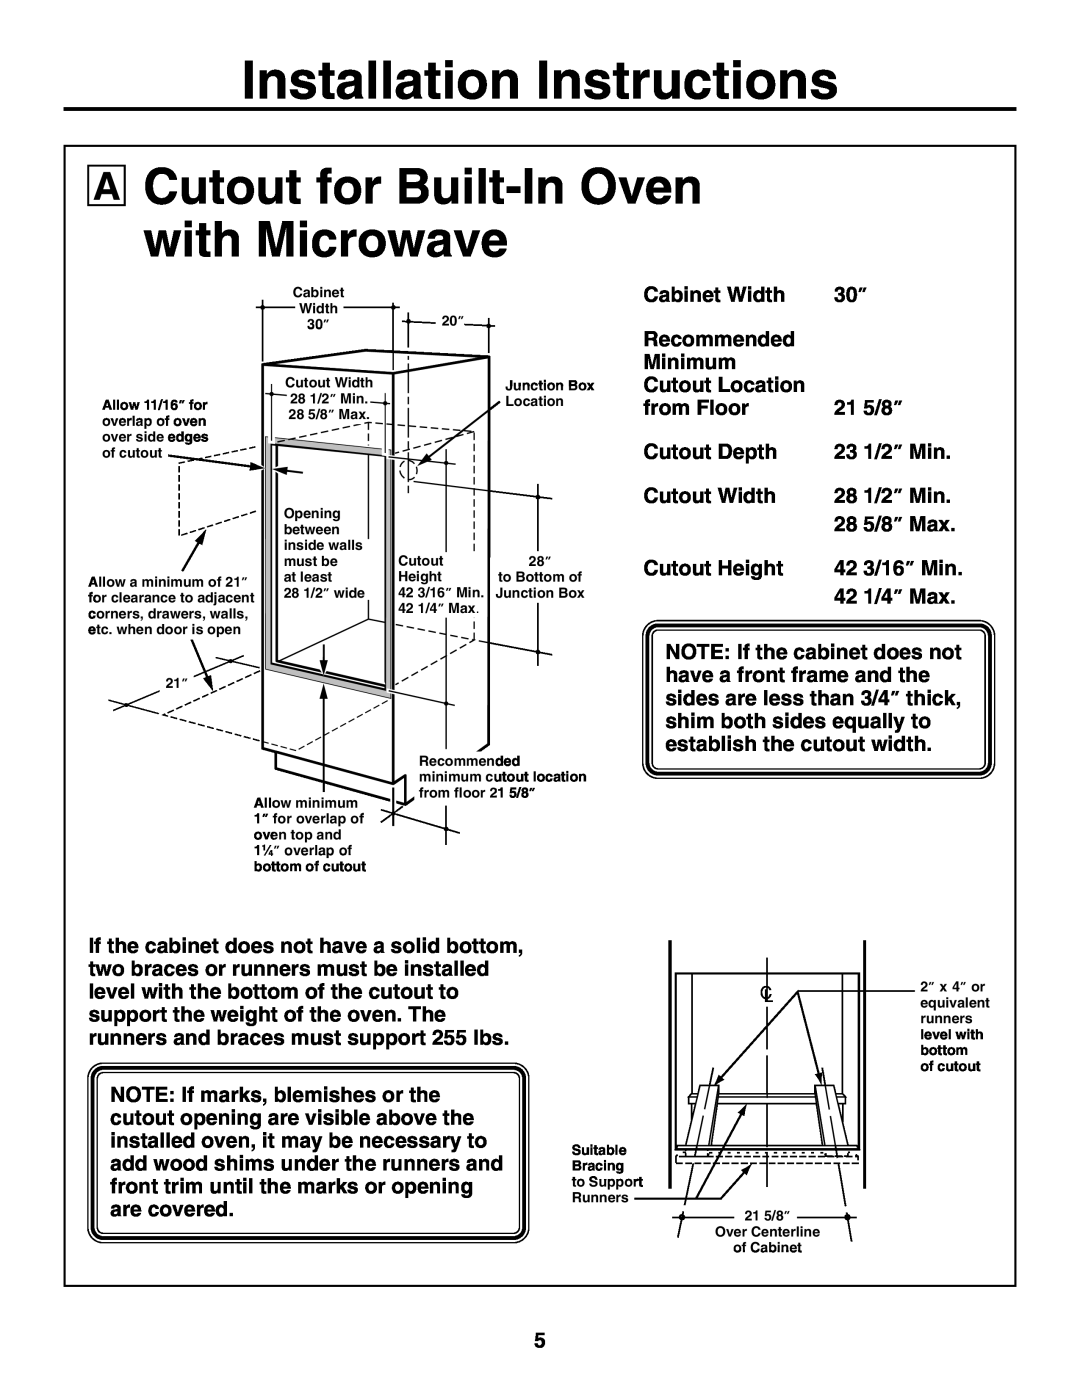 GE JTP86 installation instructions Cutout for Built-In Oven with Microwave, Installation Instructions 